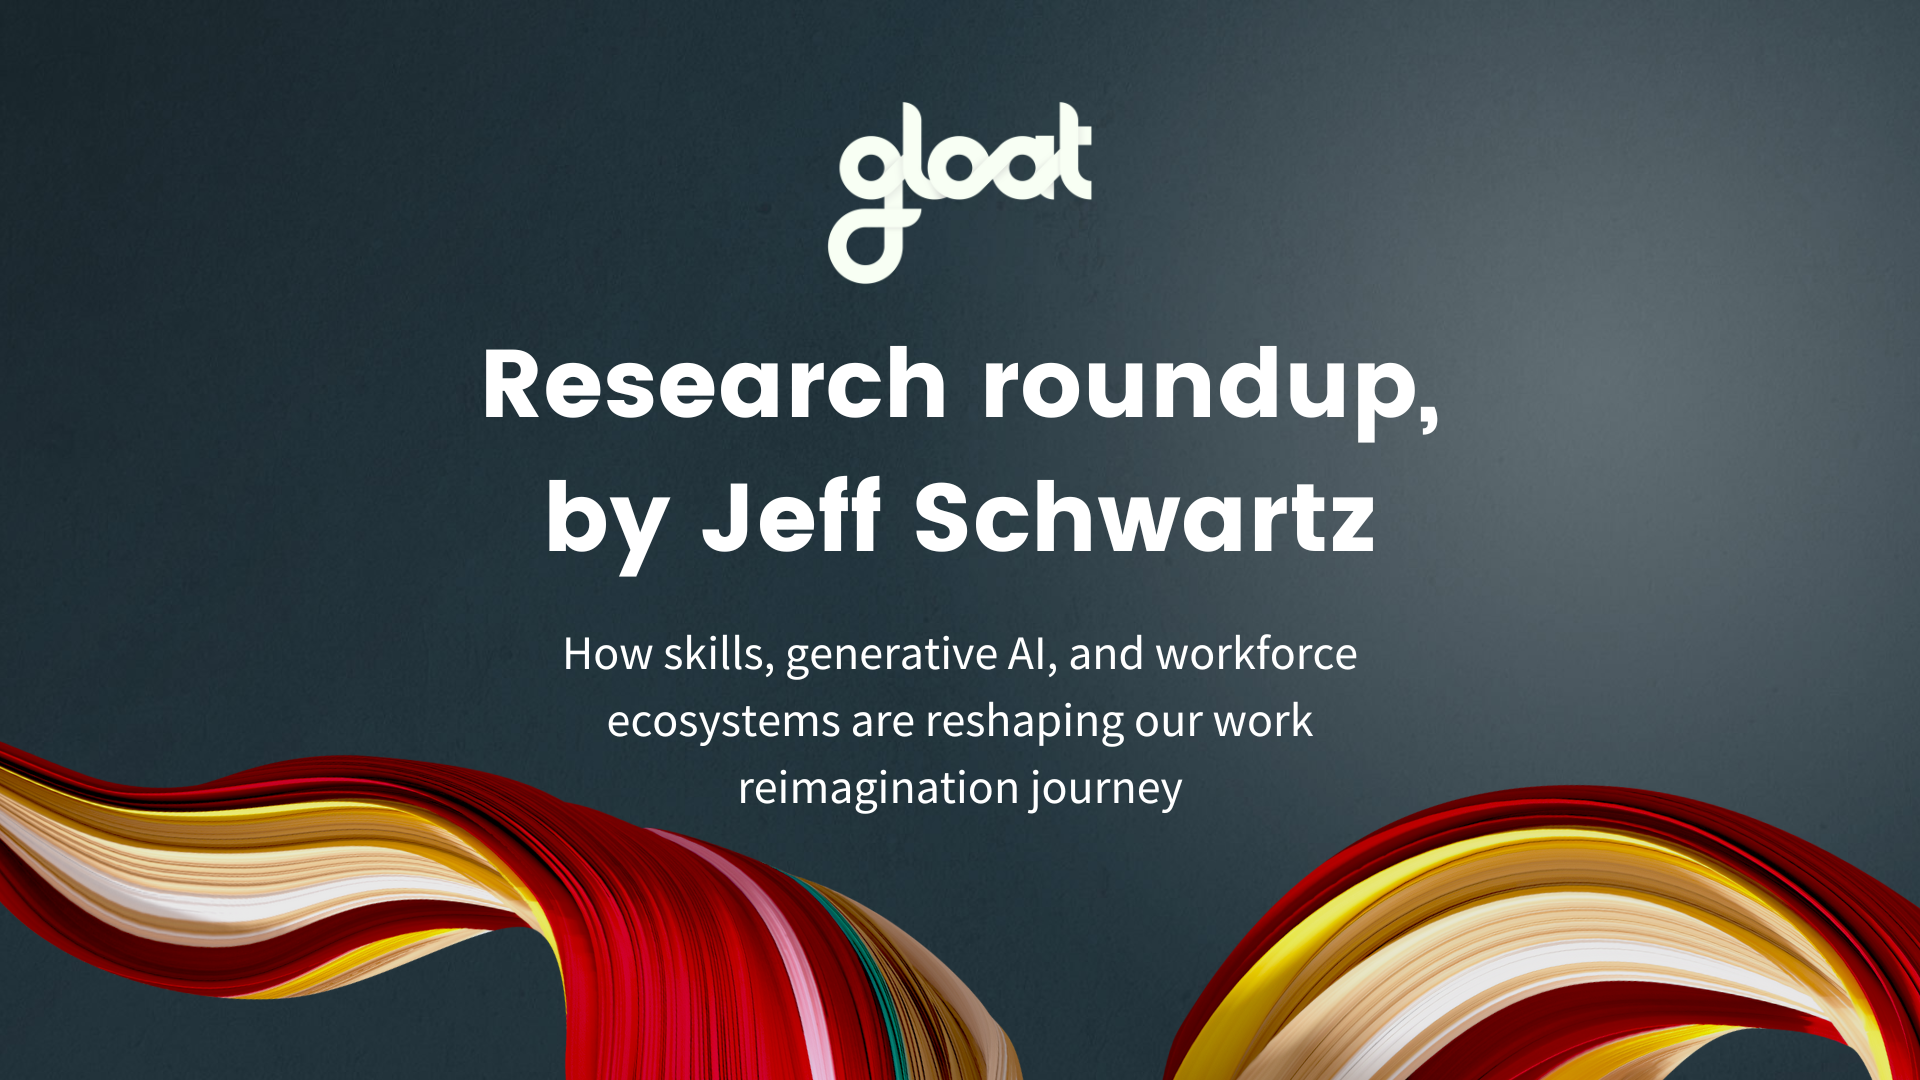 April research roundup: How skills, generative AI, and workforce ecosystems are reshaping our work resignation journey